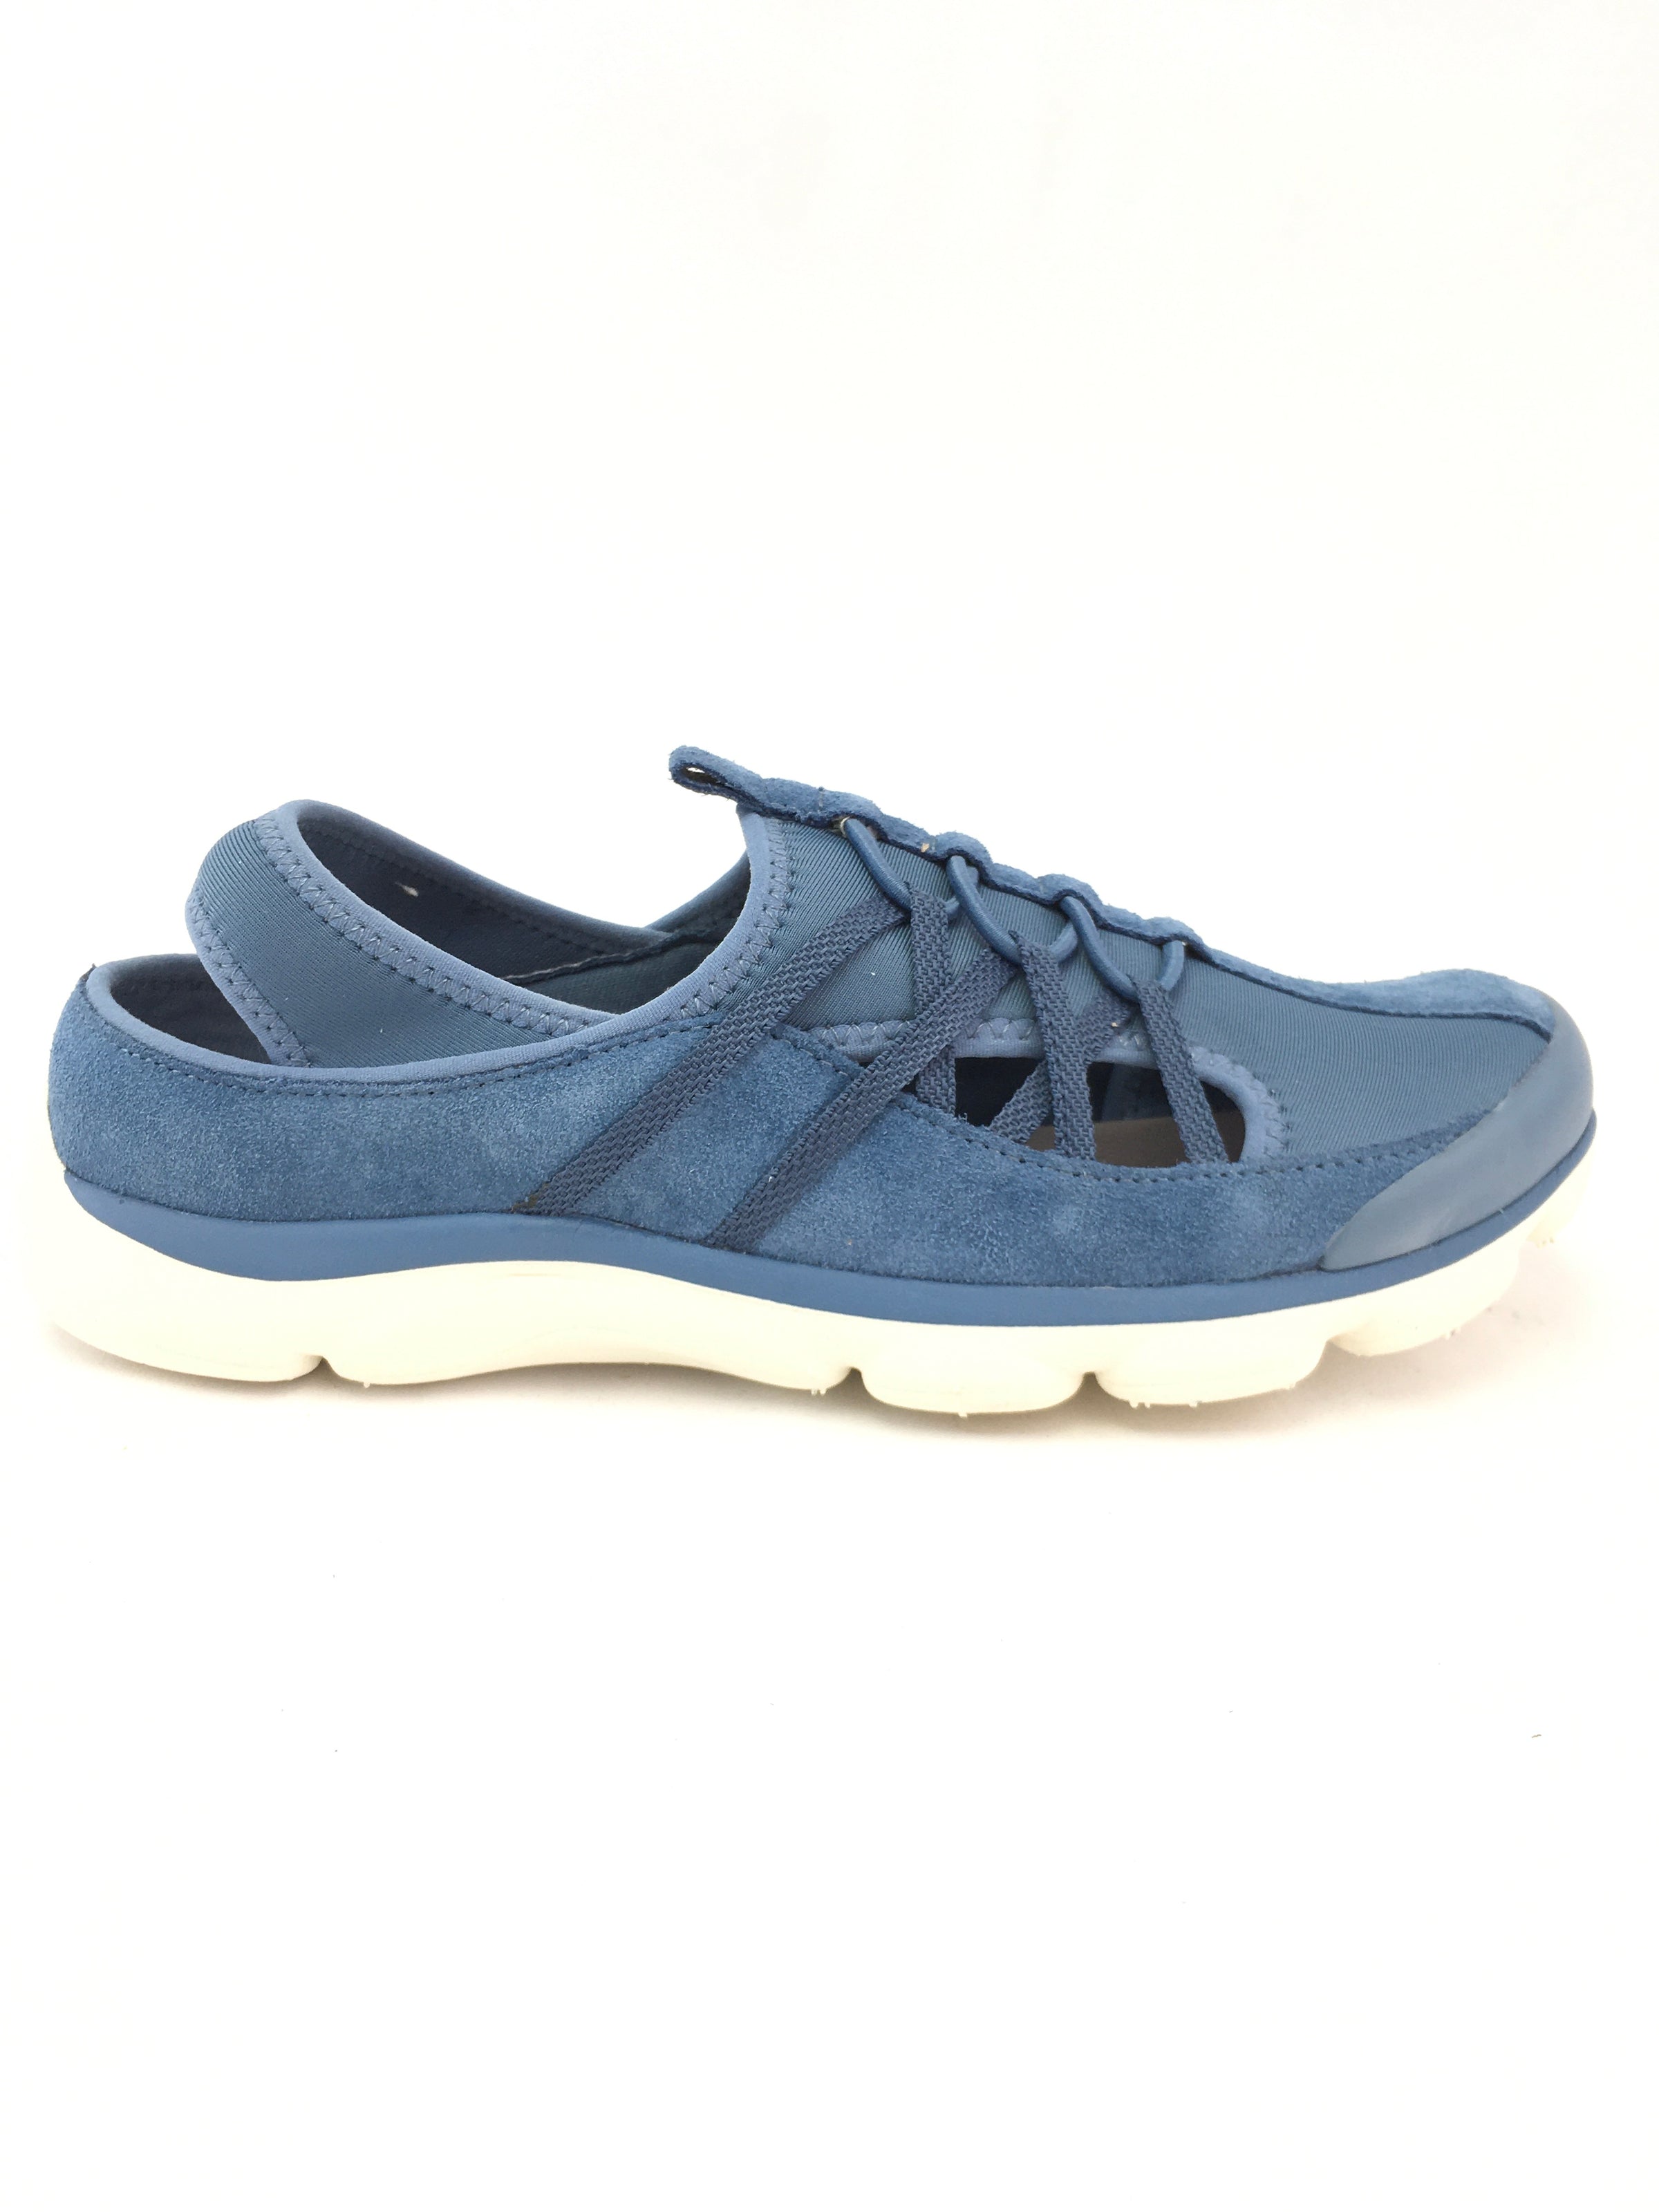 Easy Spirit Serevive Shoes Size 7W